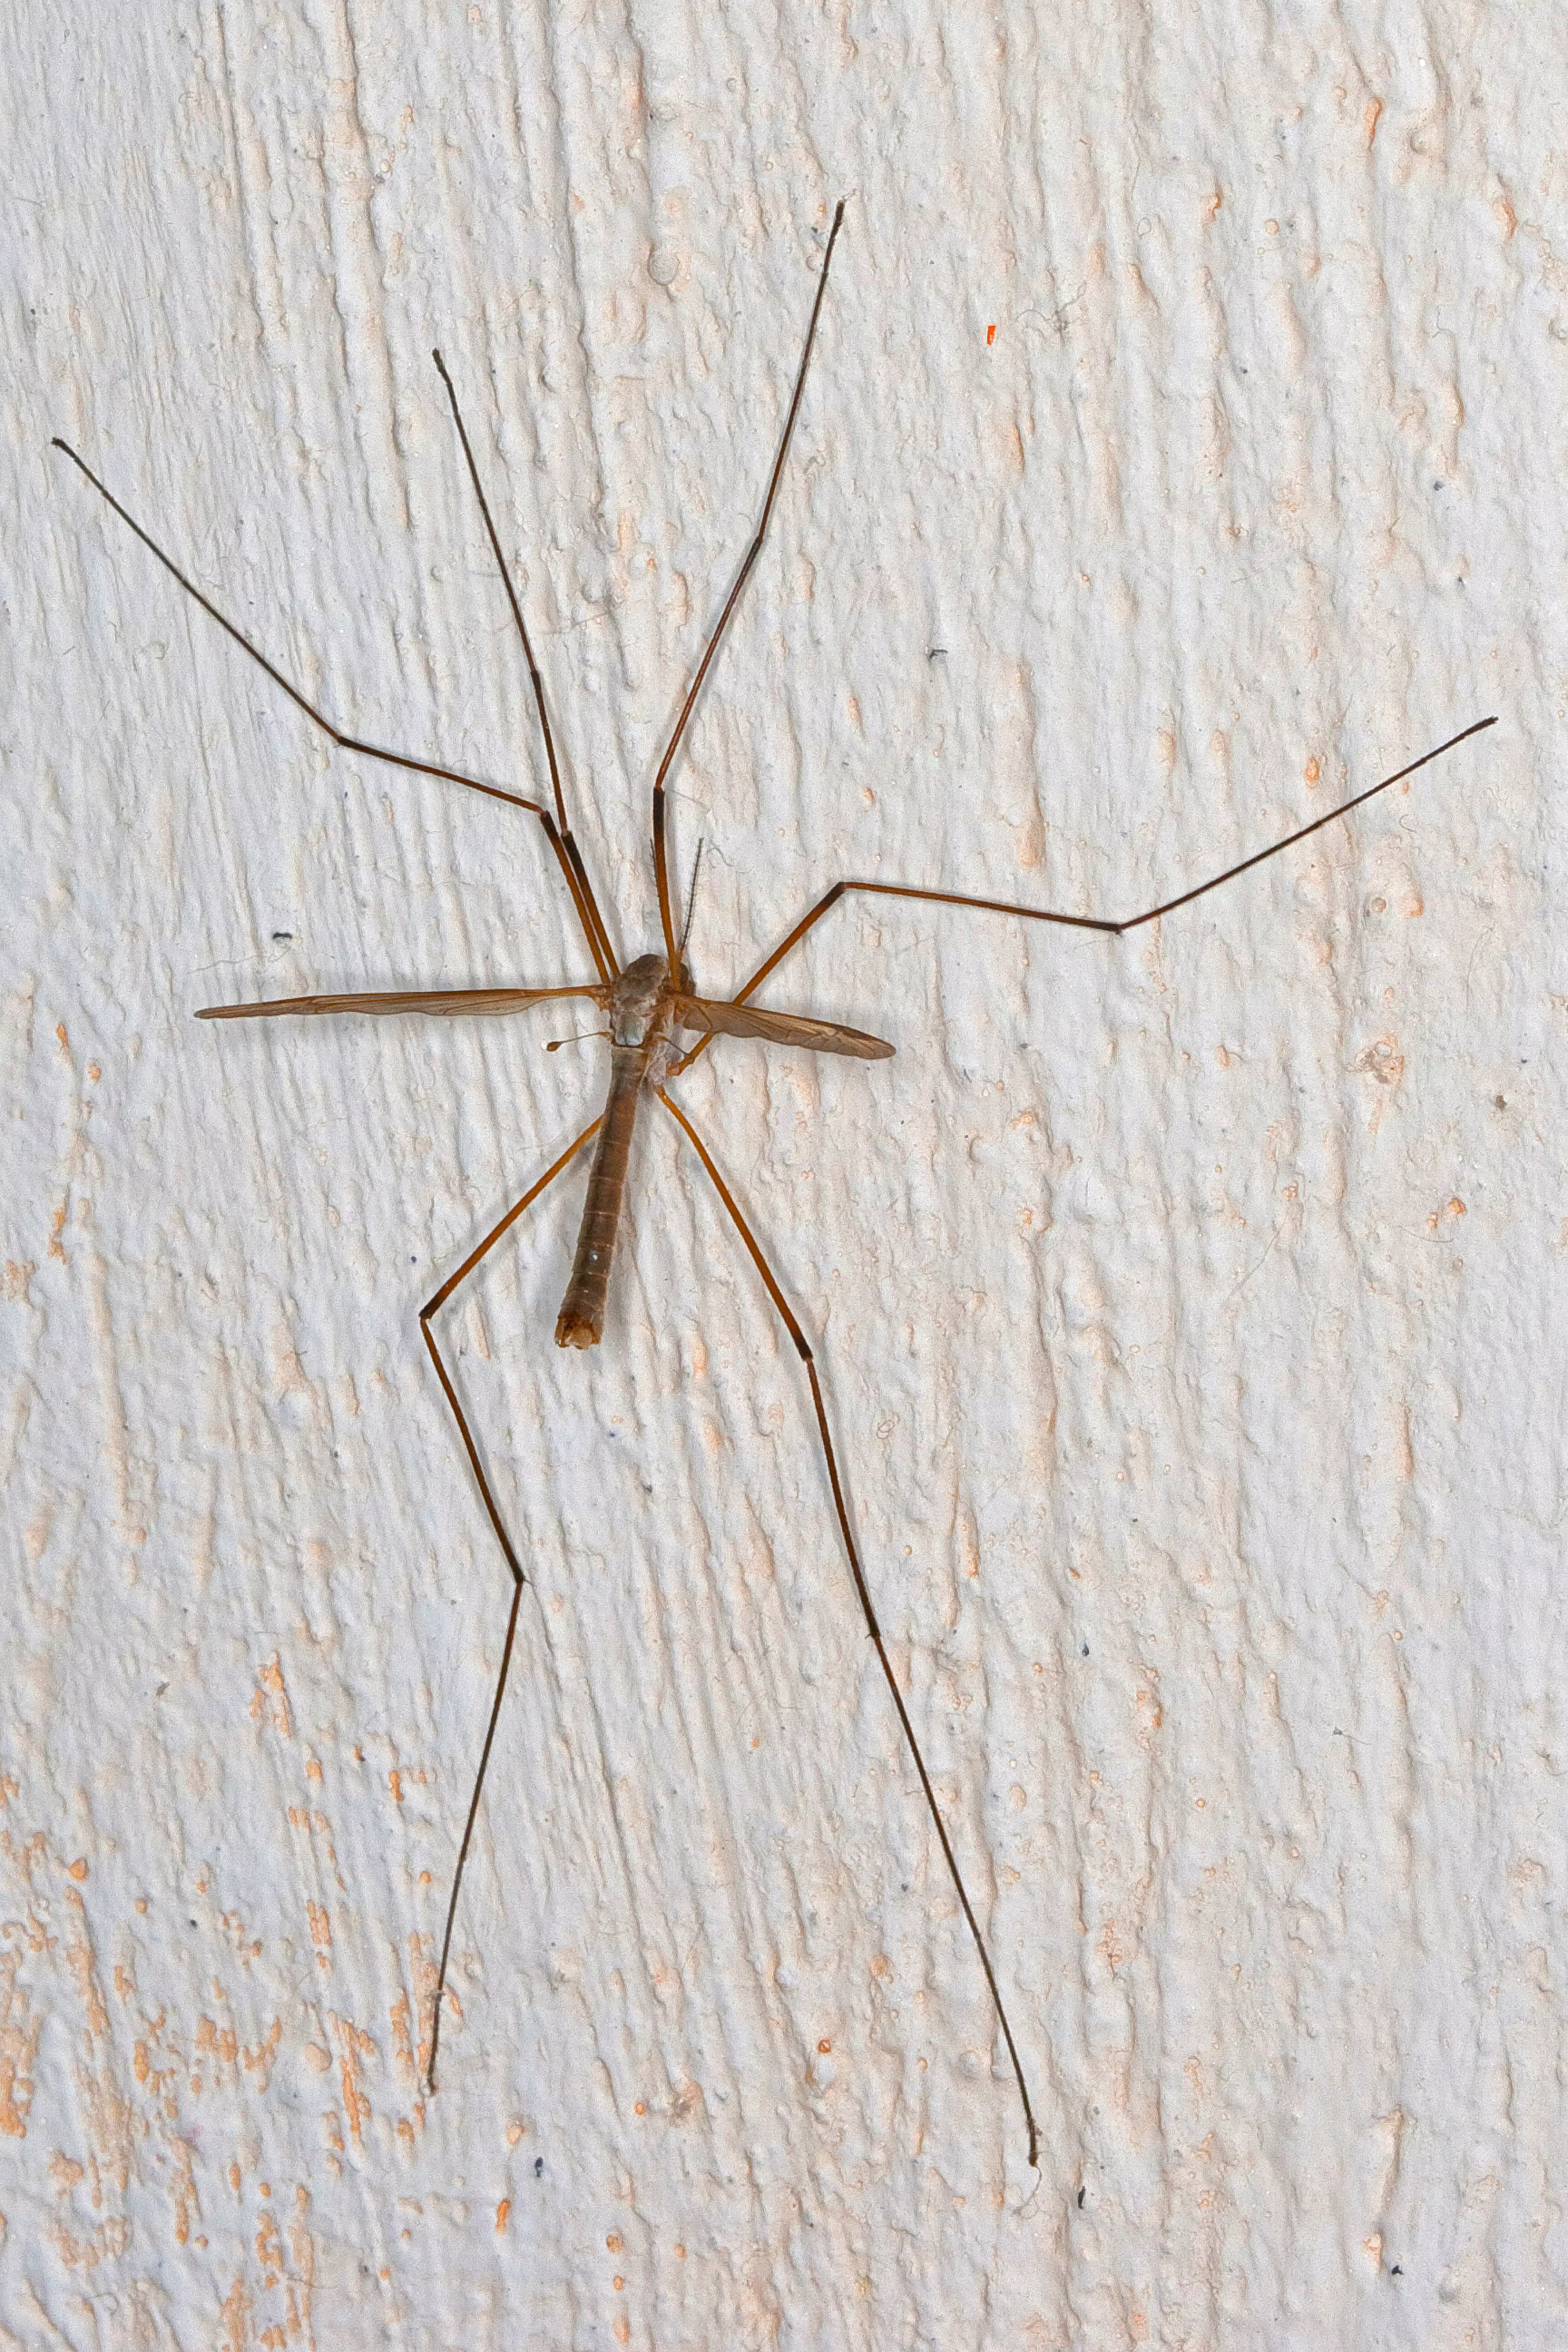 Stock image of a daddy-long-legs.